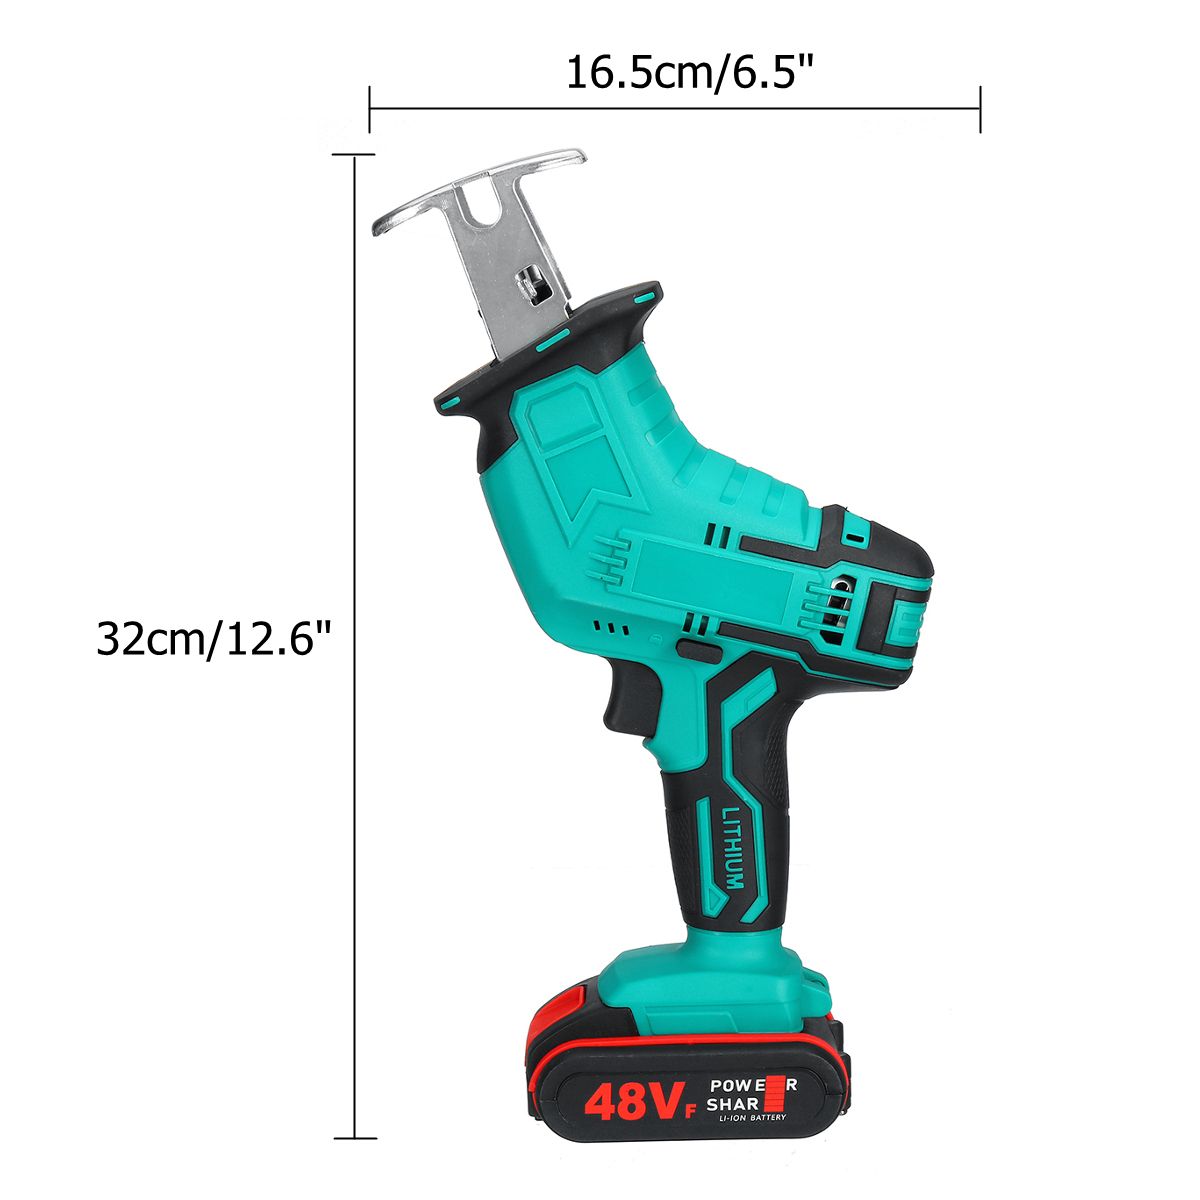 48V-Cordless-Reciprocating-Saw-With-Battery-Charger-recip-Sabre-Saw-New-Power-Tool-1734472